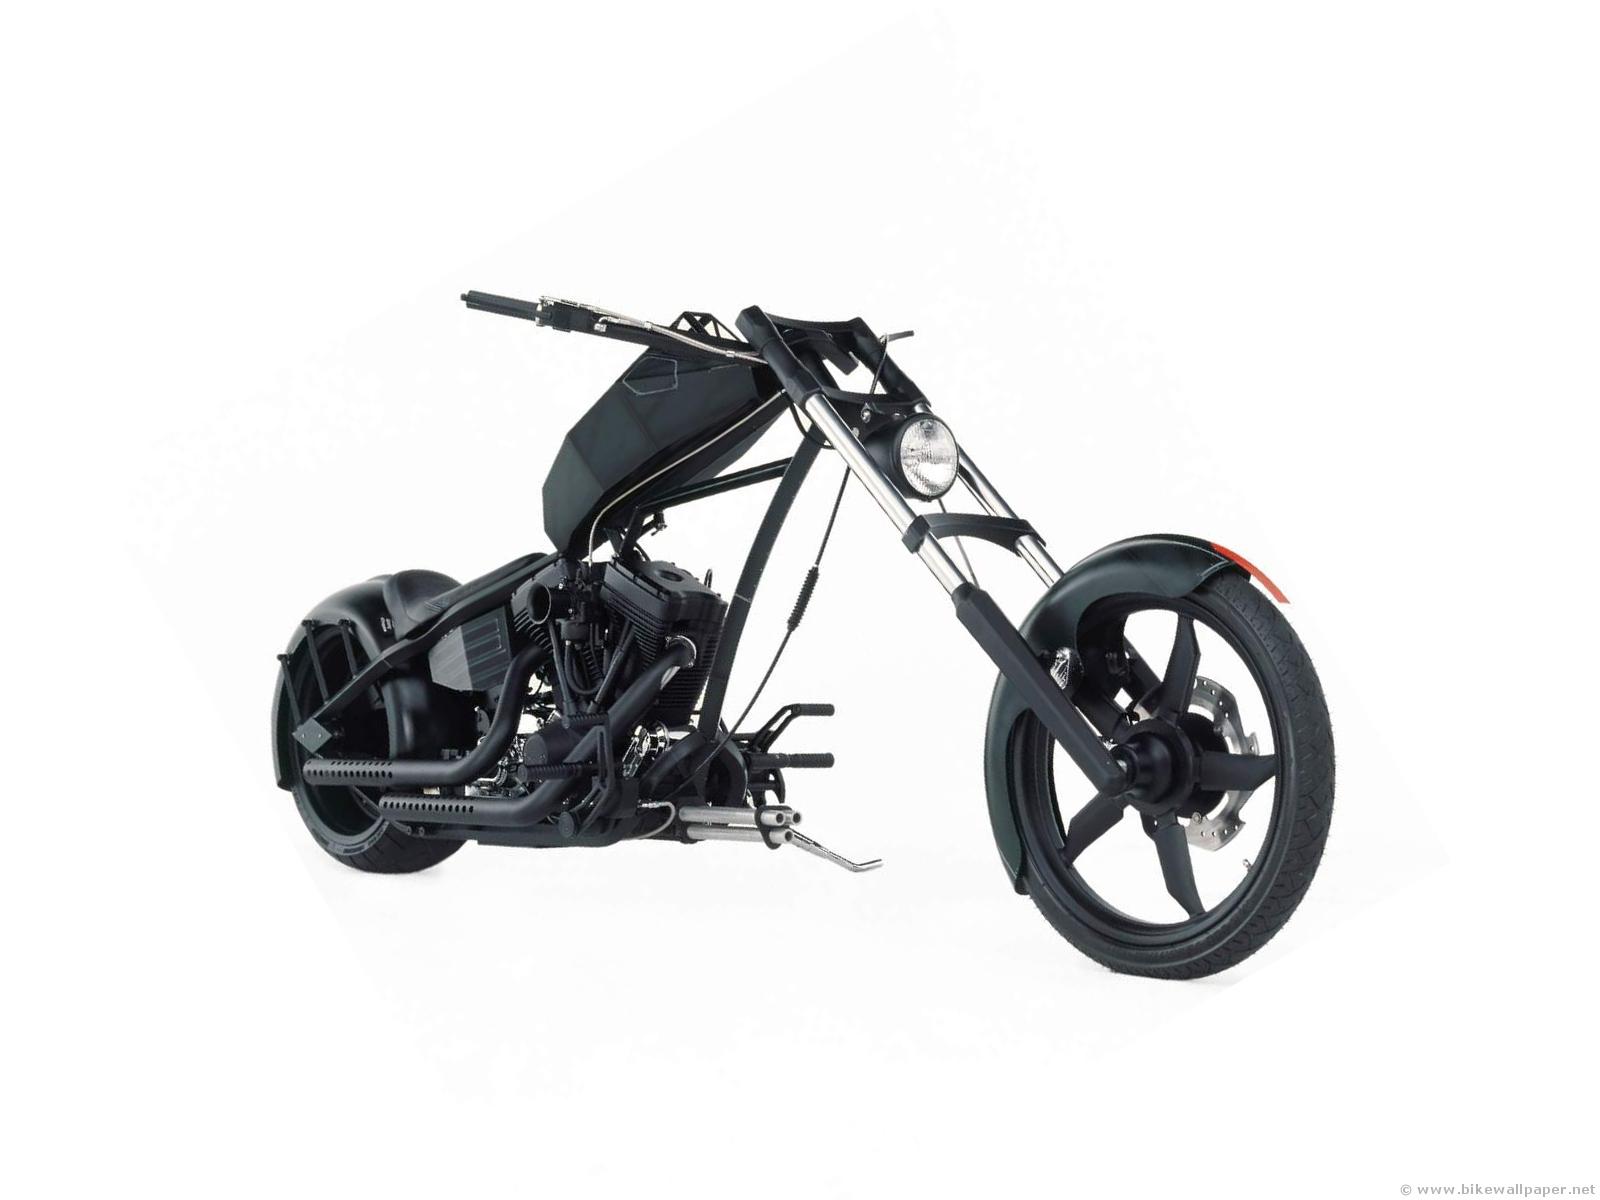 Orange county choppers comanche bike. Best photo and information